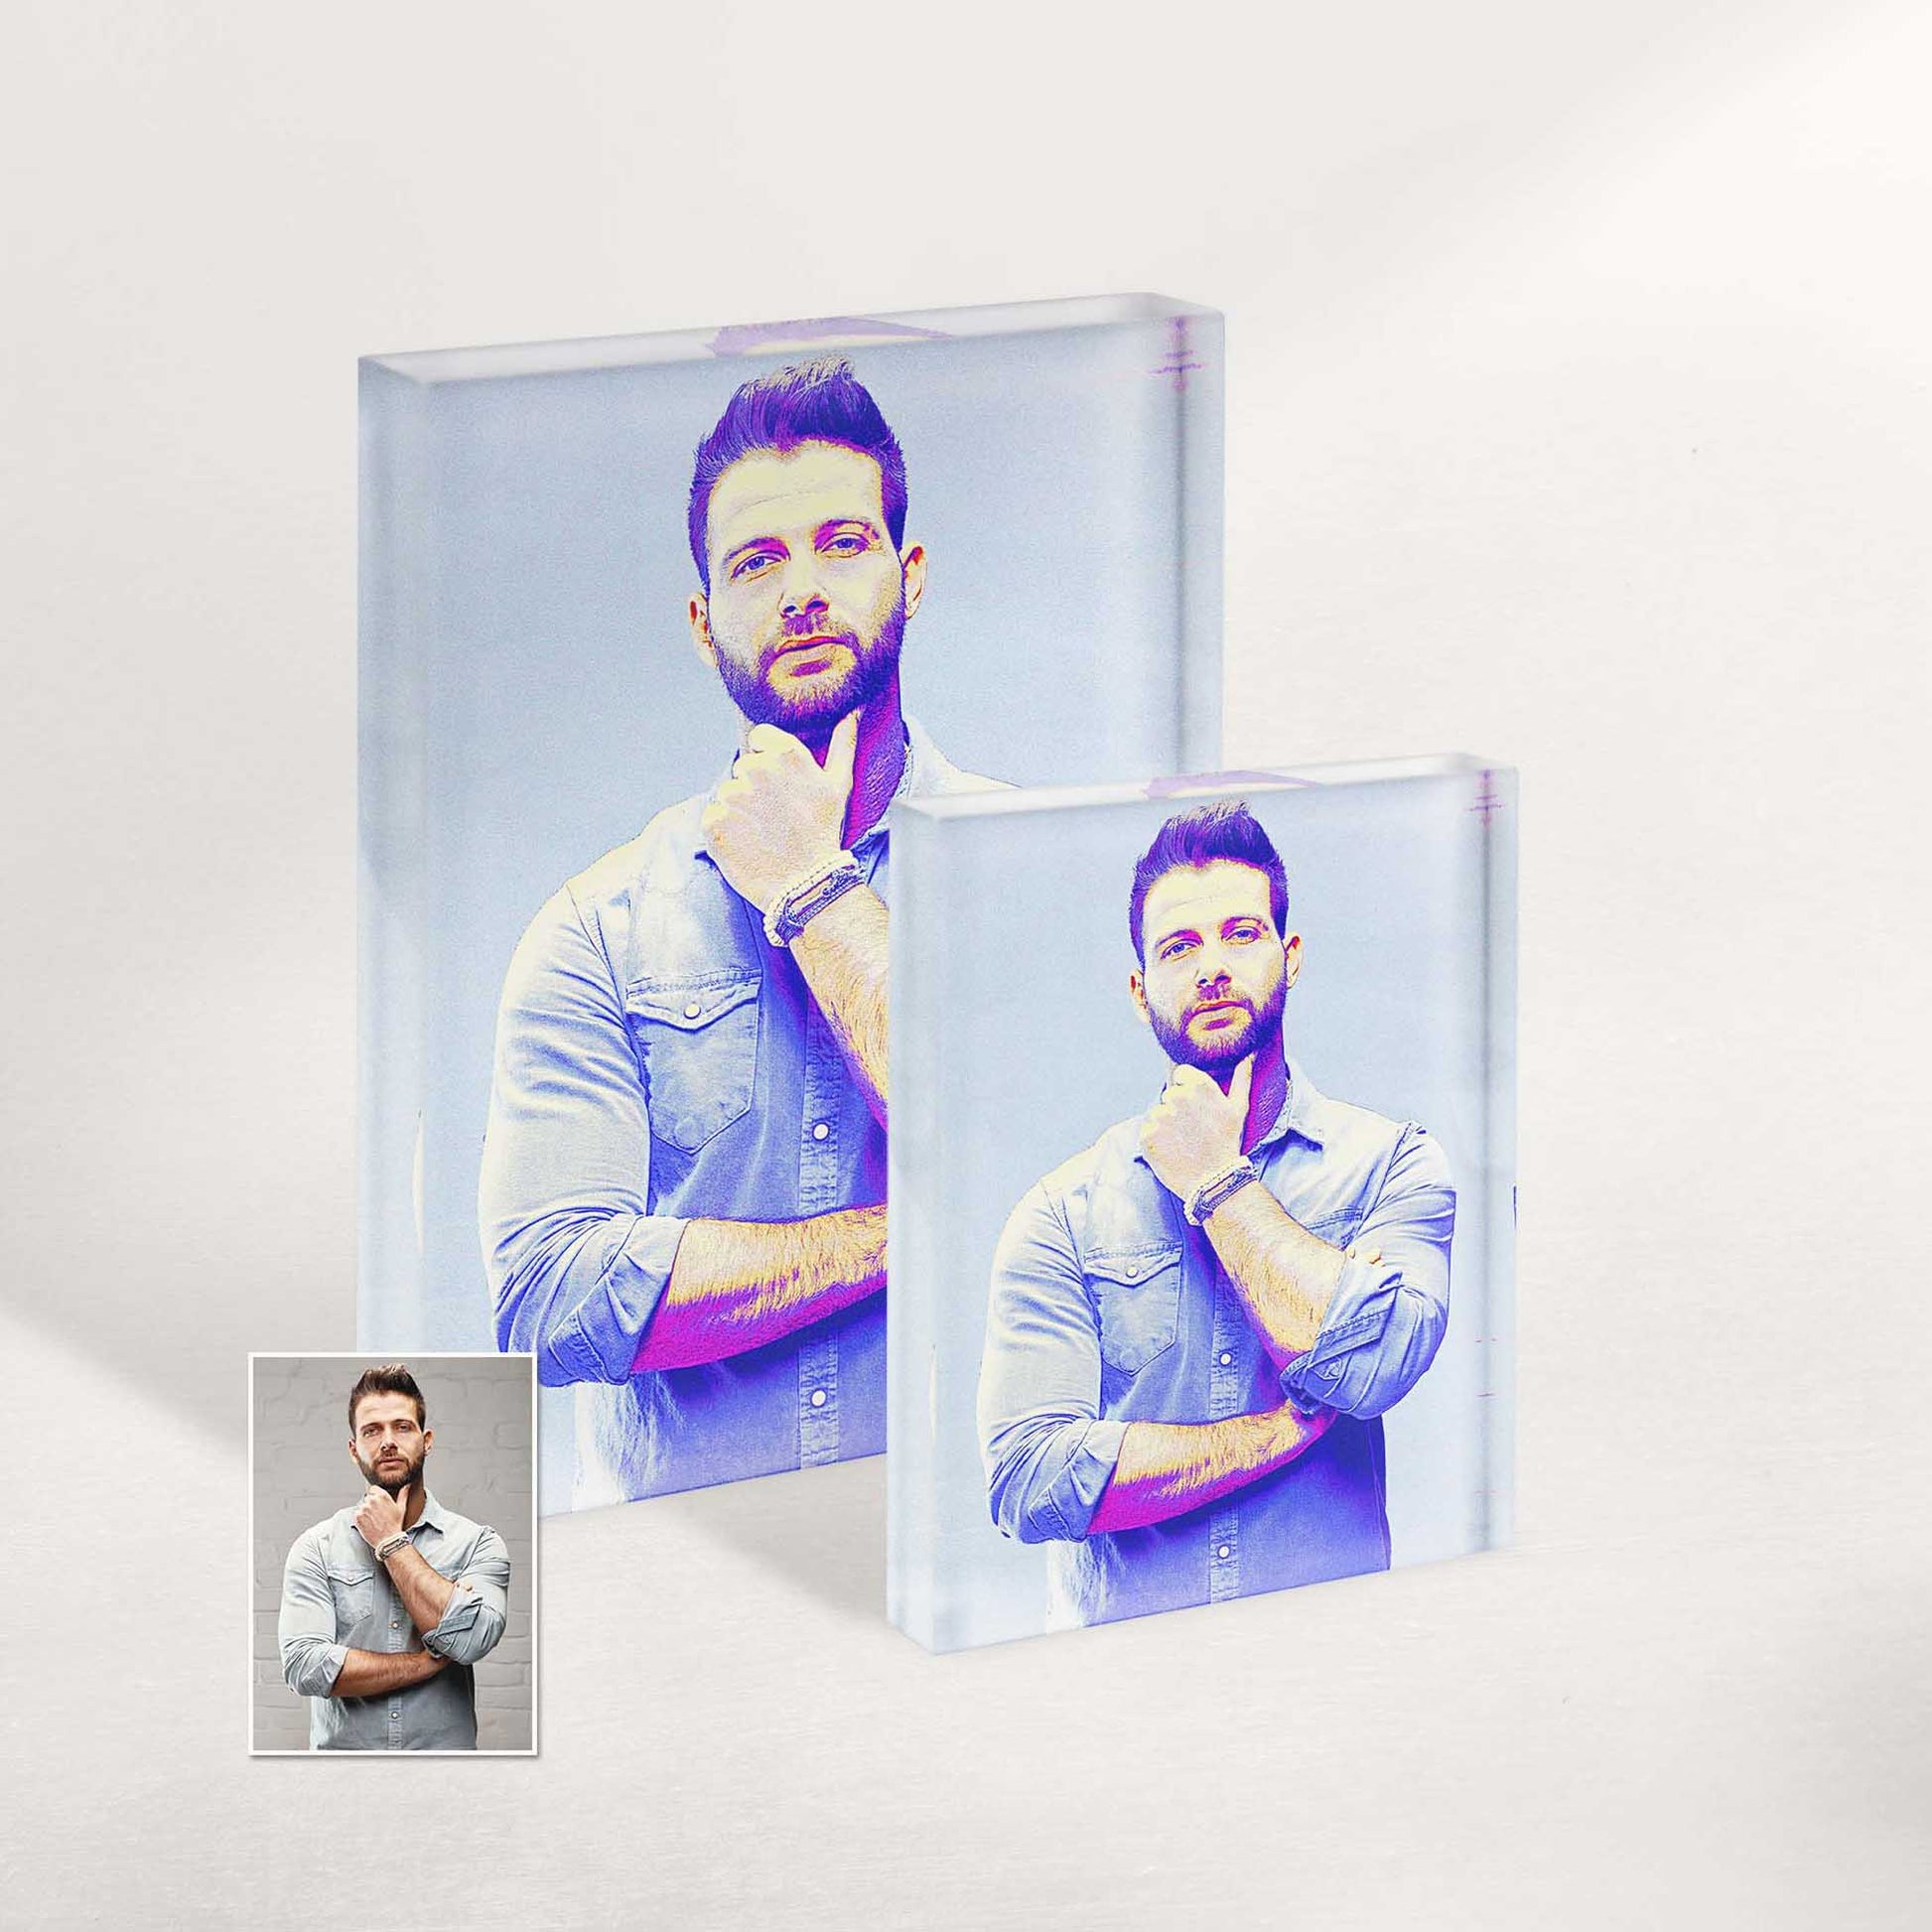 Discover the perfect gift for art enthusiasts with this personalised Blue and Purple Posterizer Acrylic Block Photo. The originality and uniqueness of the design, combined with the vibrant colors, make it a thoughtful and memorable present